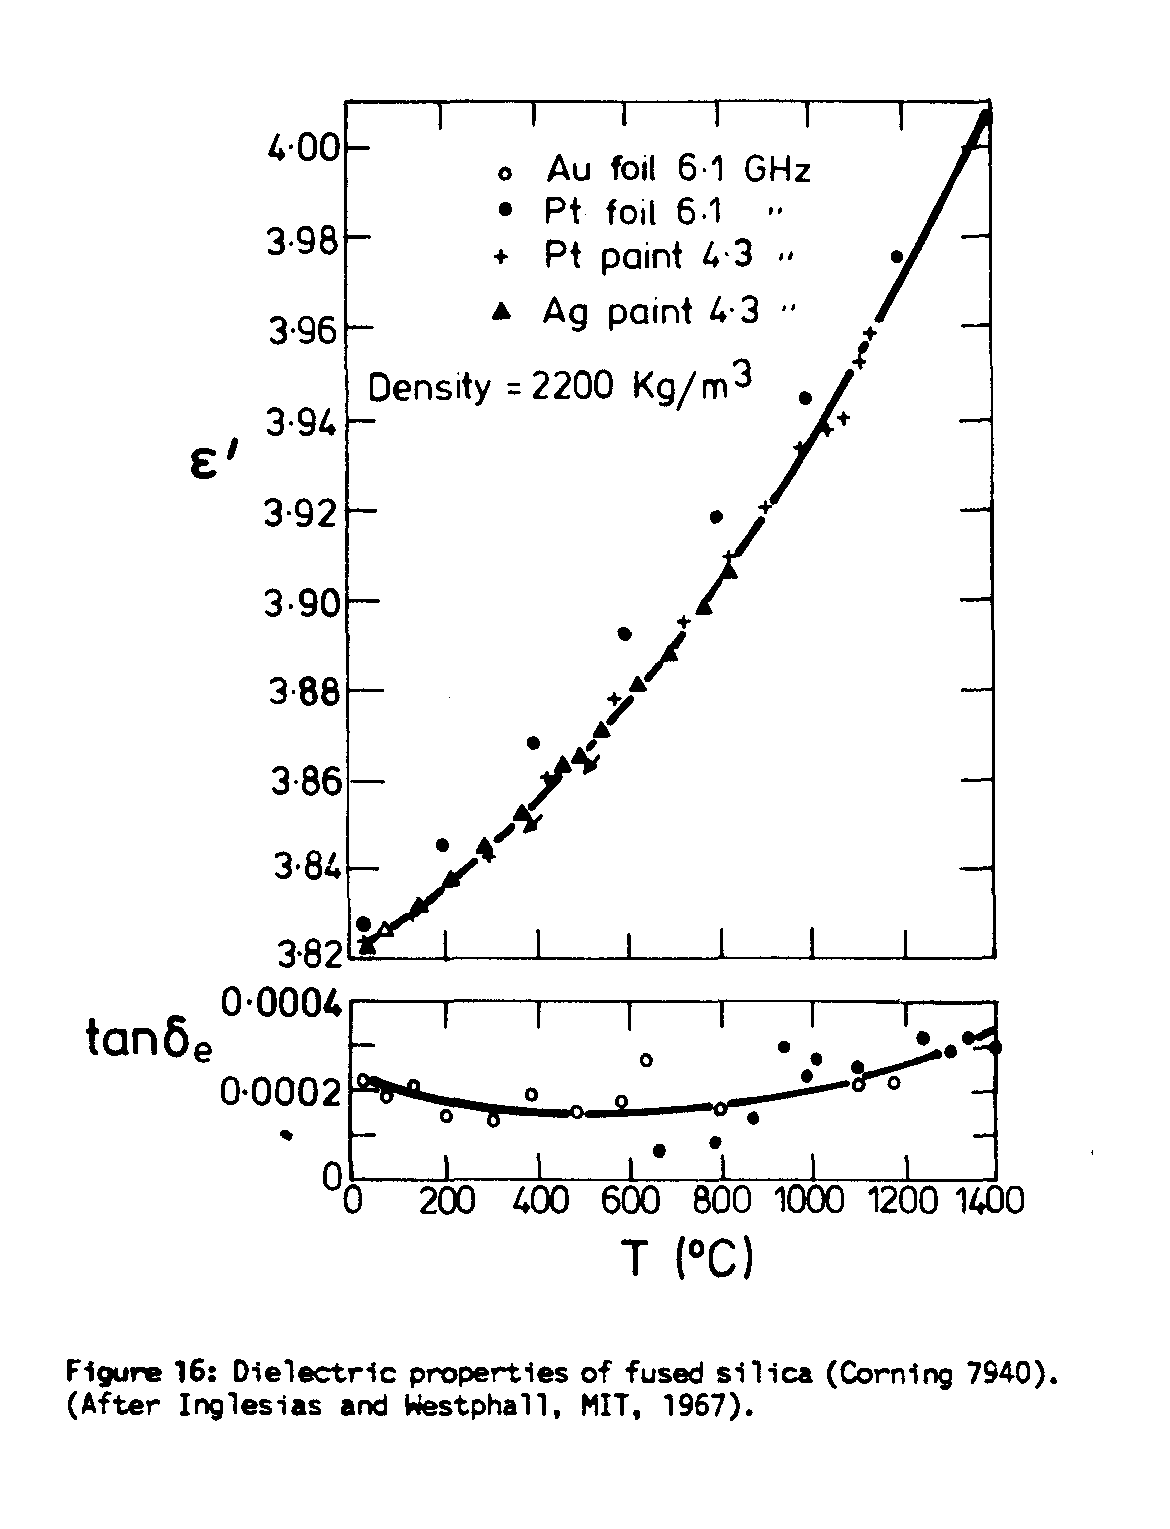 Figure 16 Dielectric properties of fused silica (Corning 7940). (After Inglesias and Westphall, MIT, 1967).